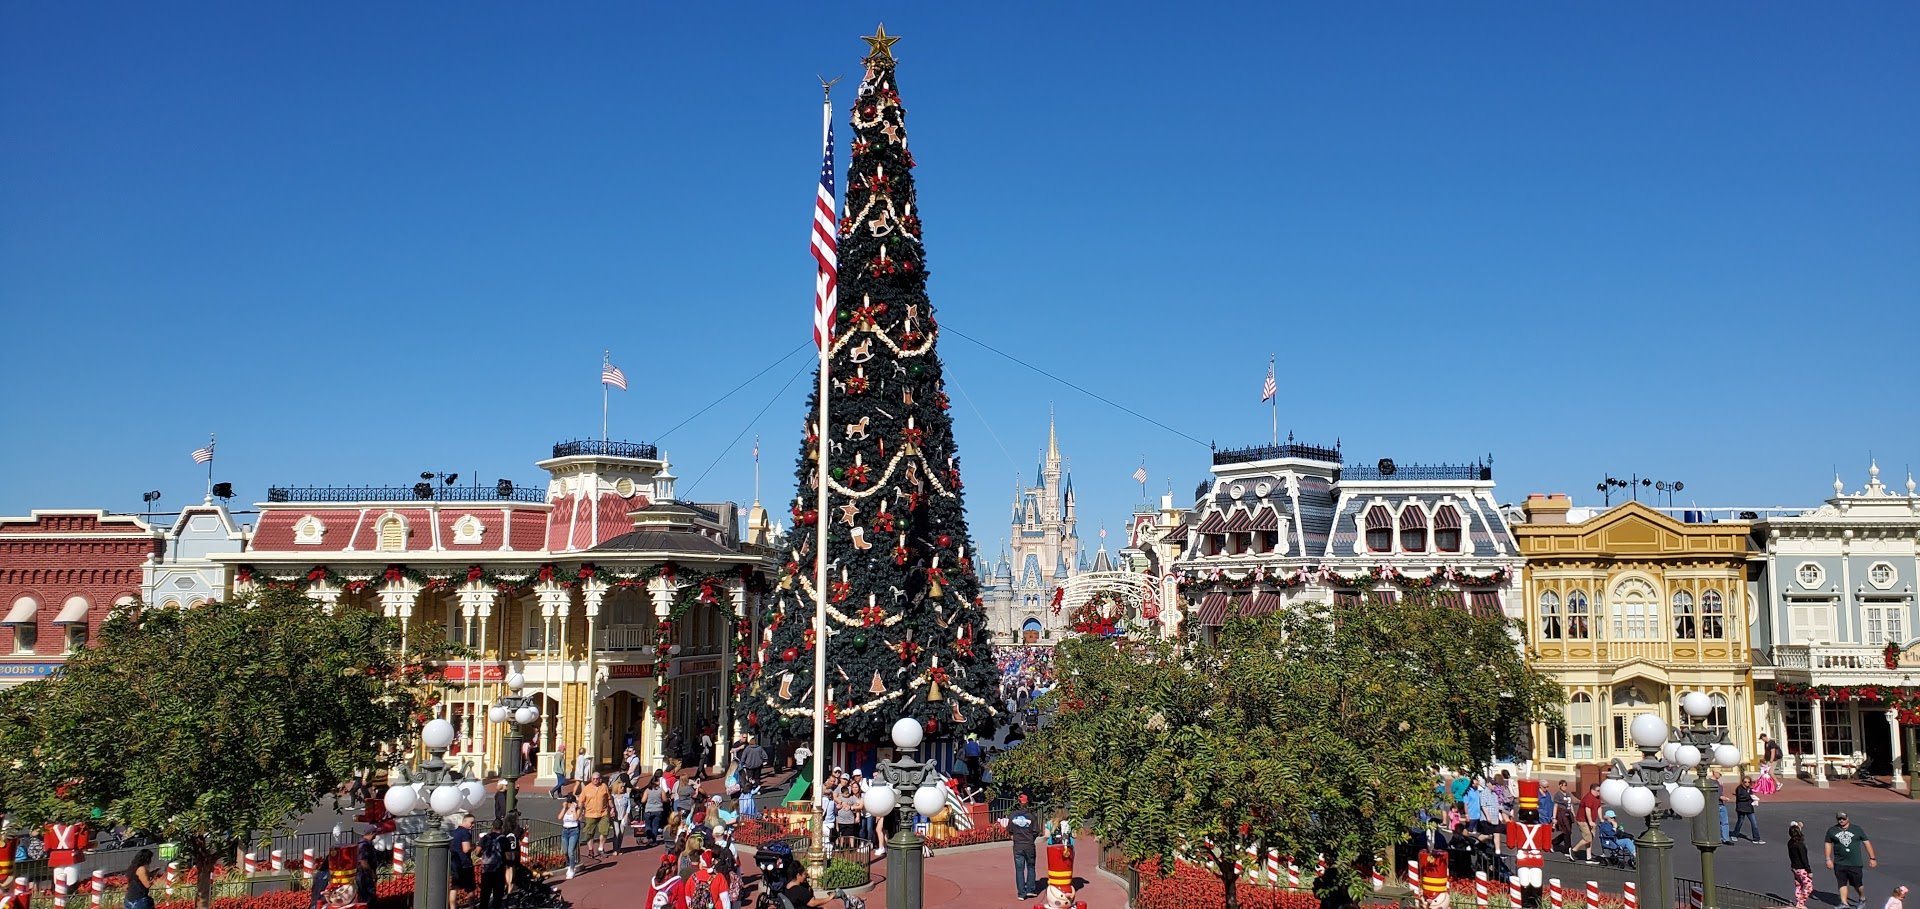 Magic Kingdom Holiday Entertainment Now Open To All Guest!